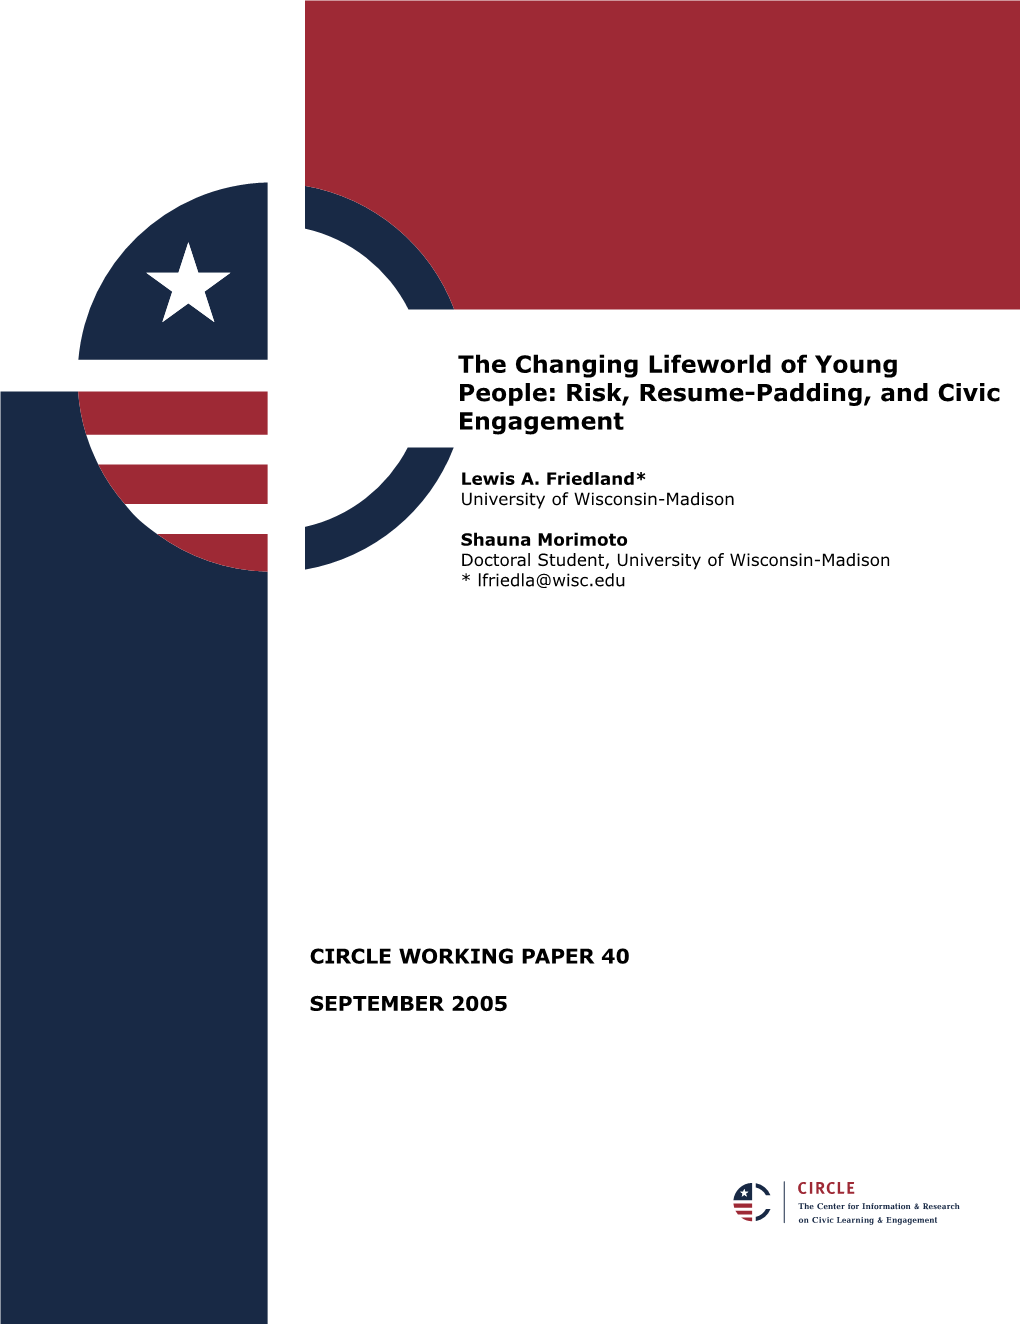 The Changing Lifeworld of Young People: Risk, Resume-Padding, and Civic Engagement